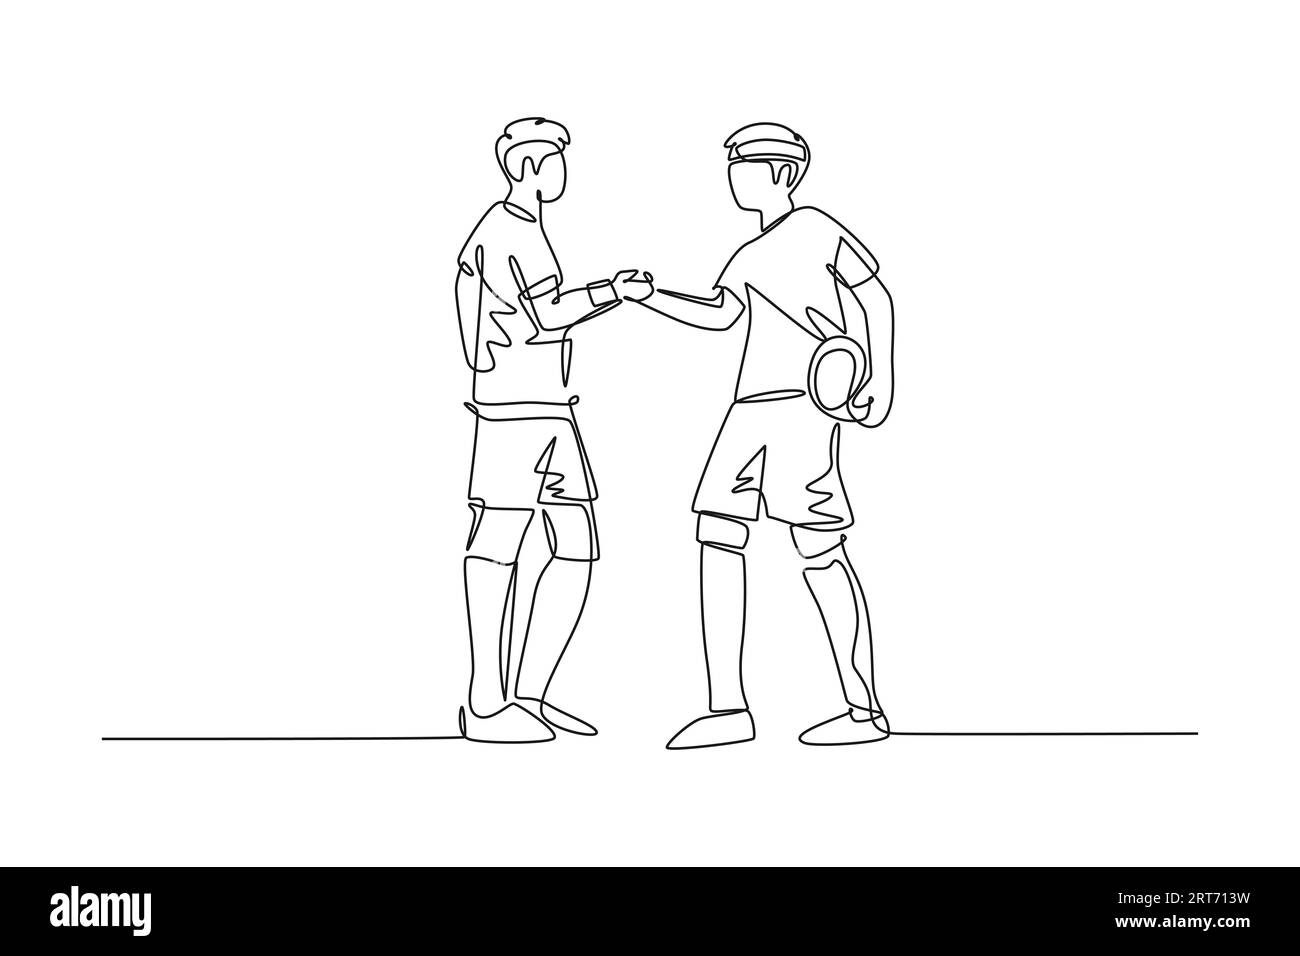 Single one line drawing two football player bring ball and handshaking to show sportsmanship before starting the match. Respect in soccer sport. Conti Stock Photo